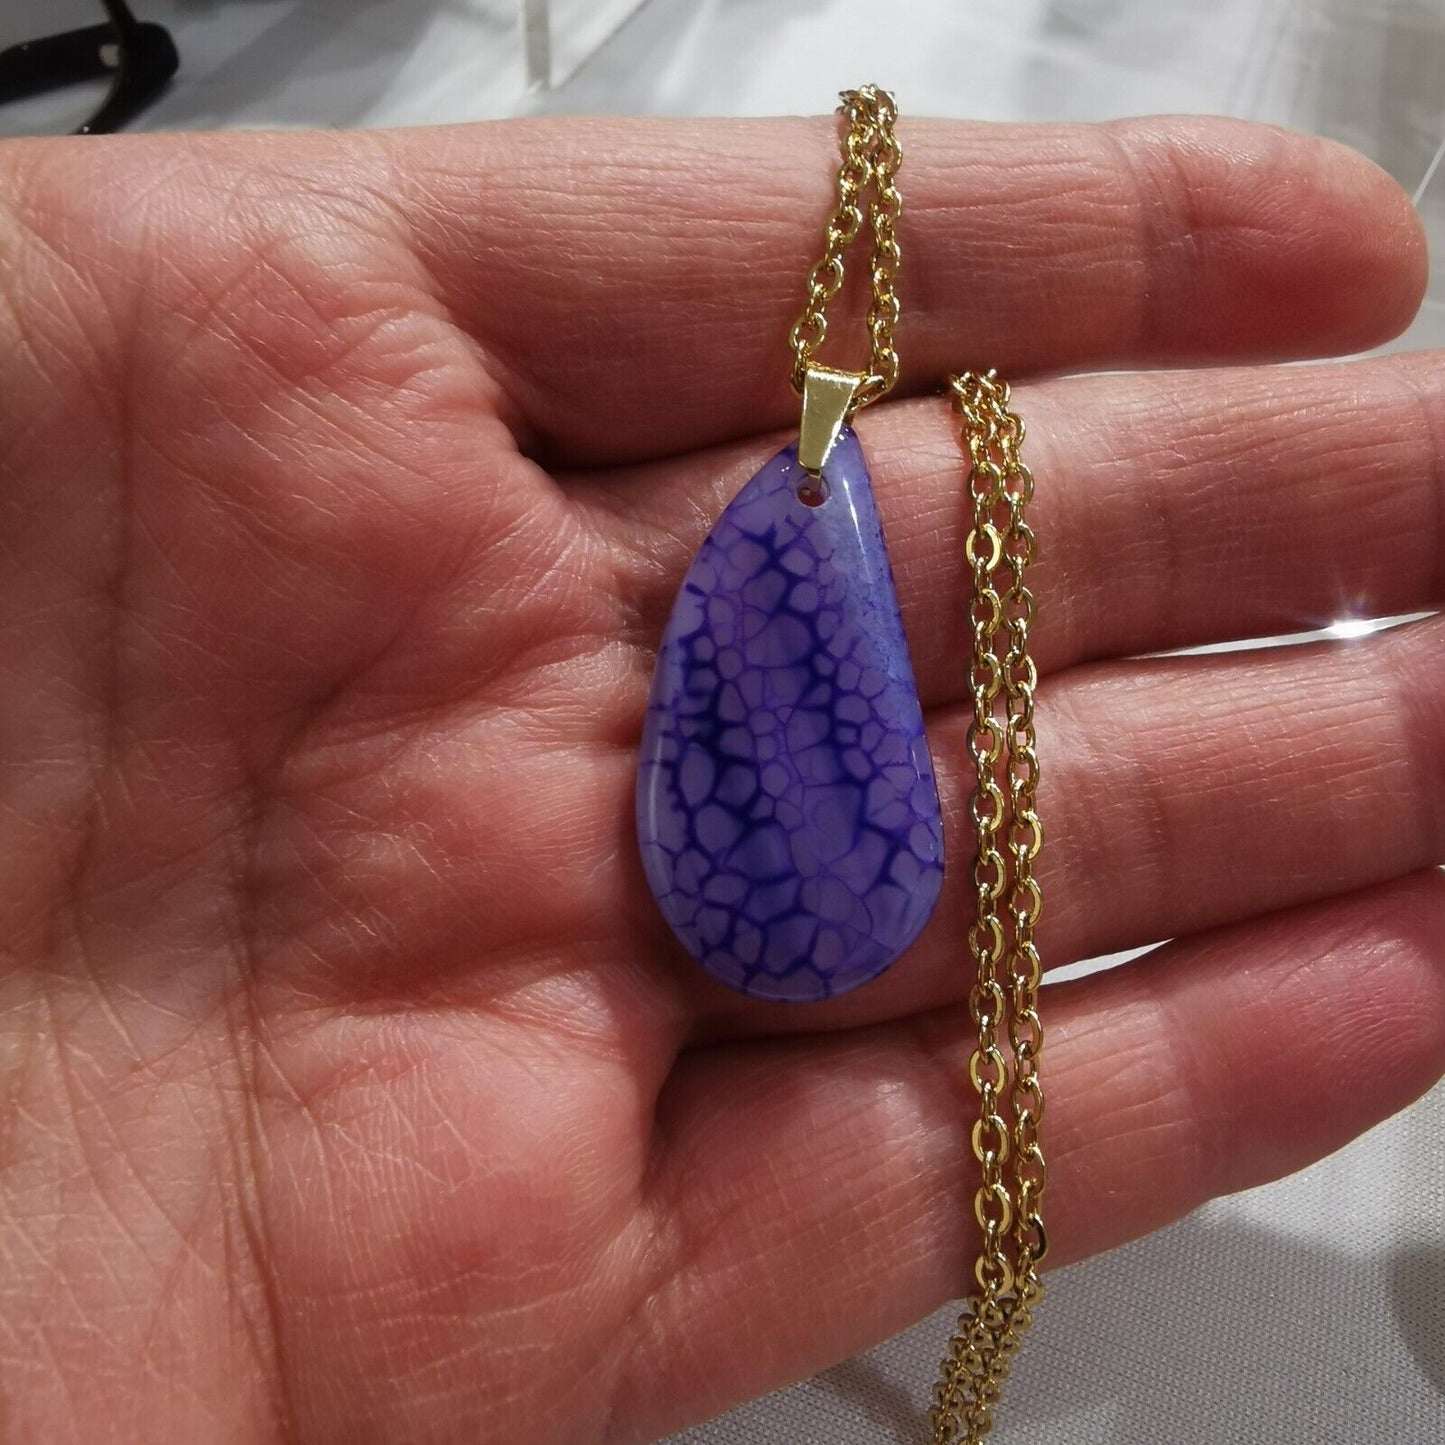 Purple Dragonvein Agate Pendant Gold Plated Stainless Steel Chain Necklace